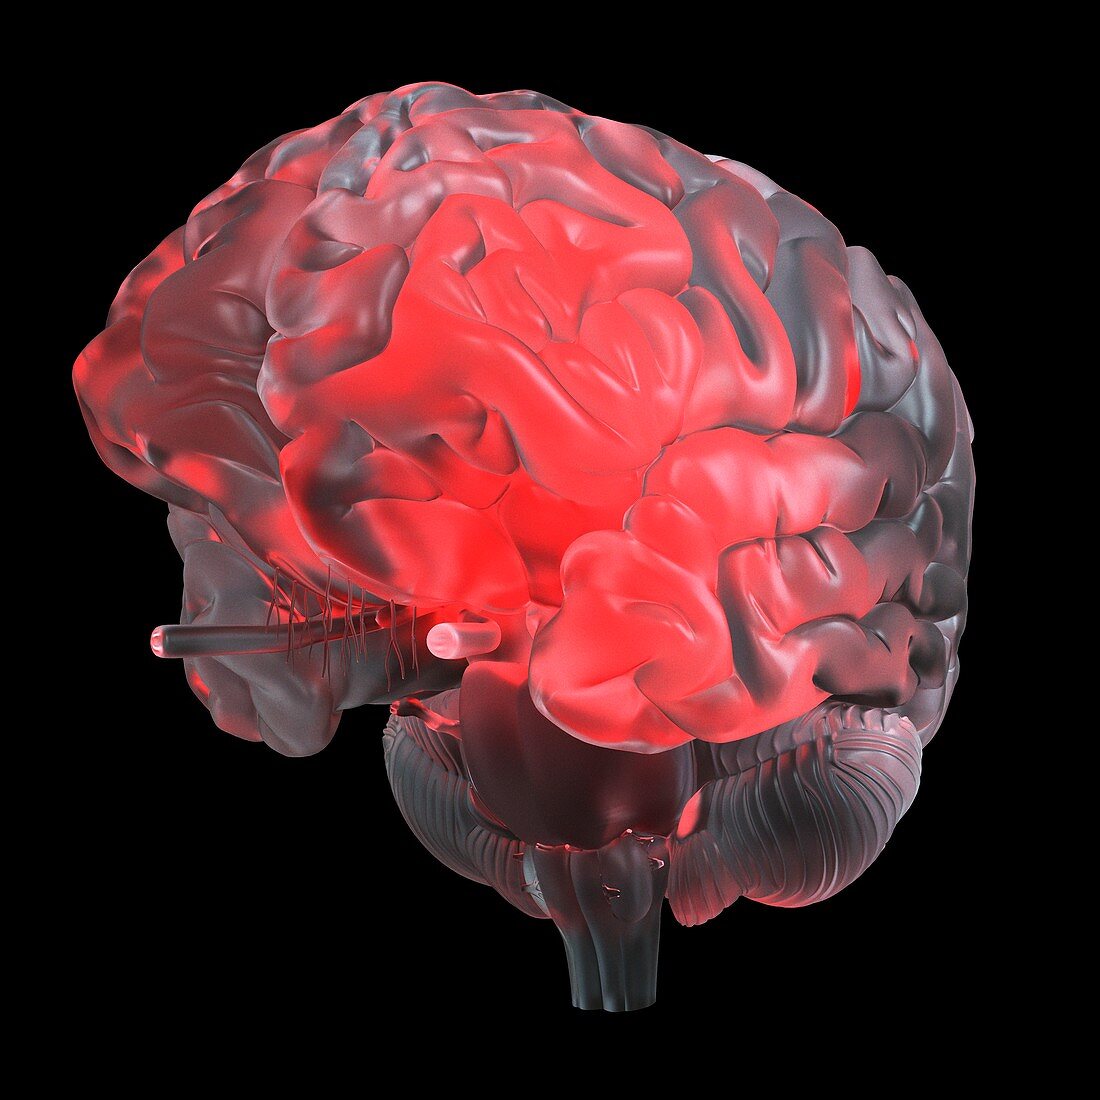 Illustration of a red glowing glass brain